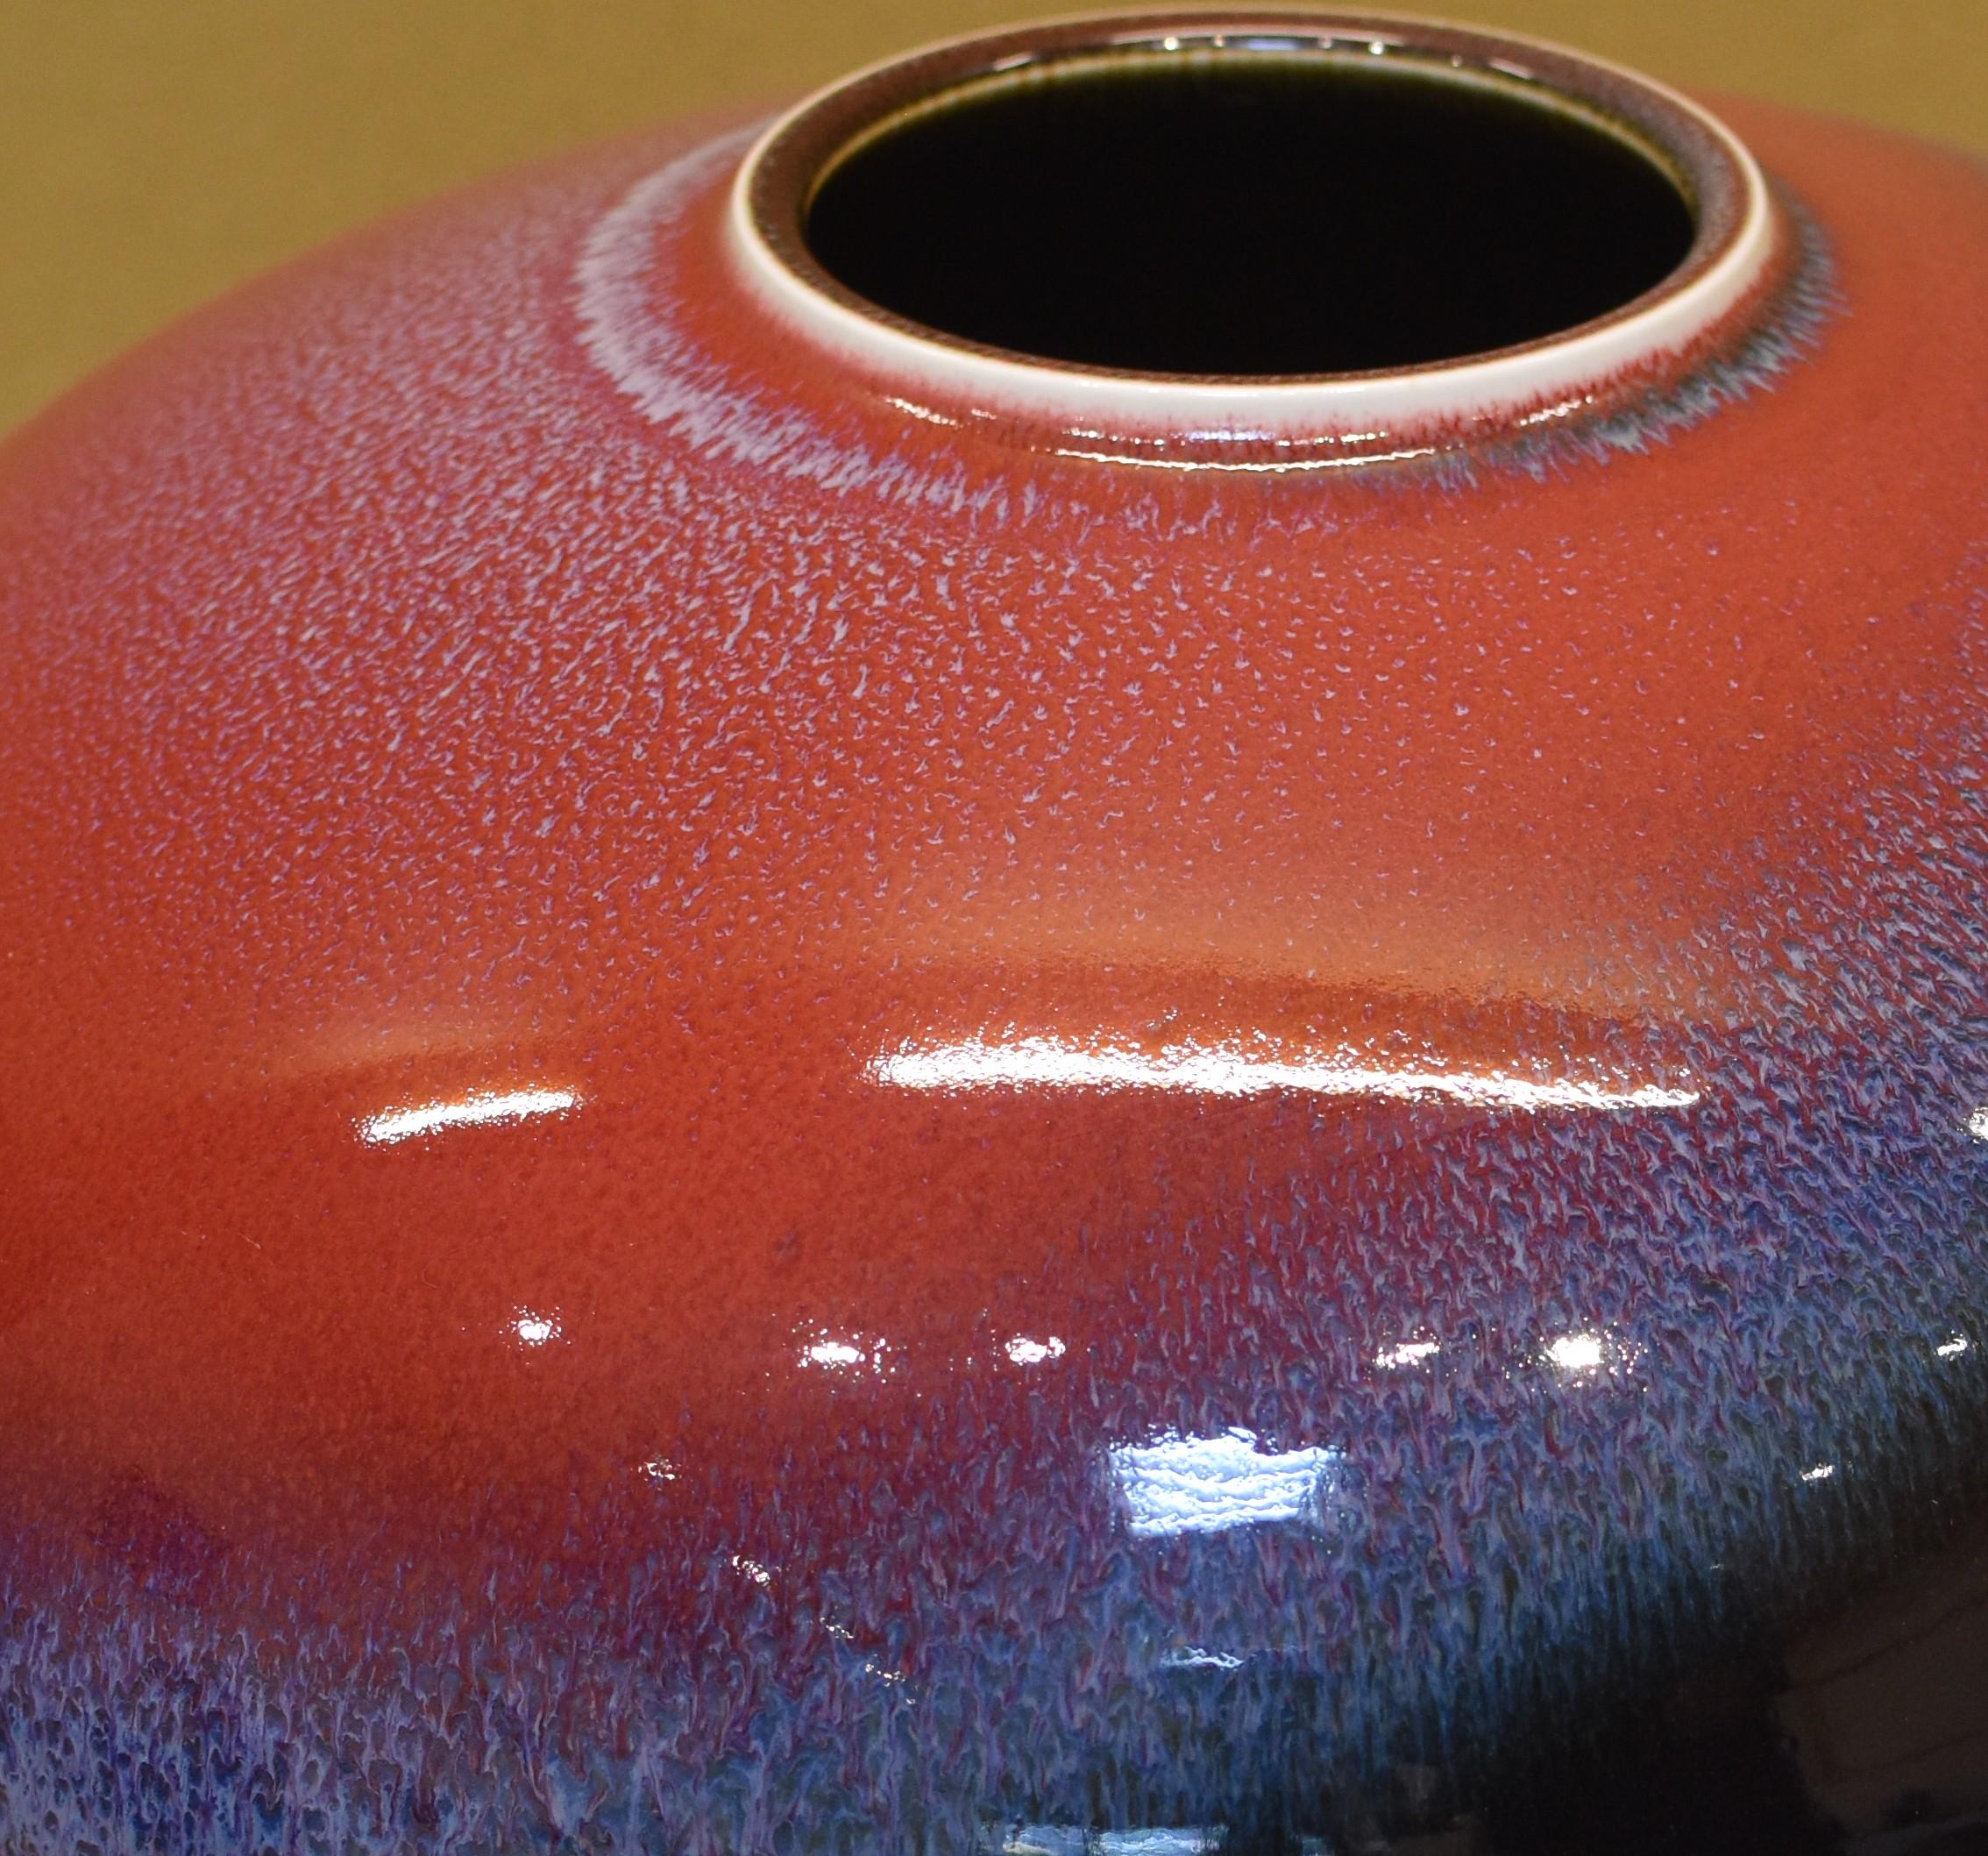 Mesmerizing highly collectible Japanese contemporary decorative porcelain vase of exceptional charm, an exhibition piece, stunningly hand-glazed in vivid blue, red and black on a beautifully shaped body, the artist's signature multiple layering of